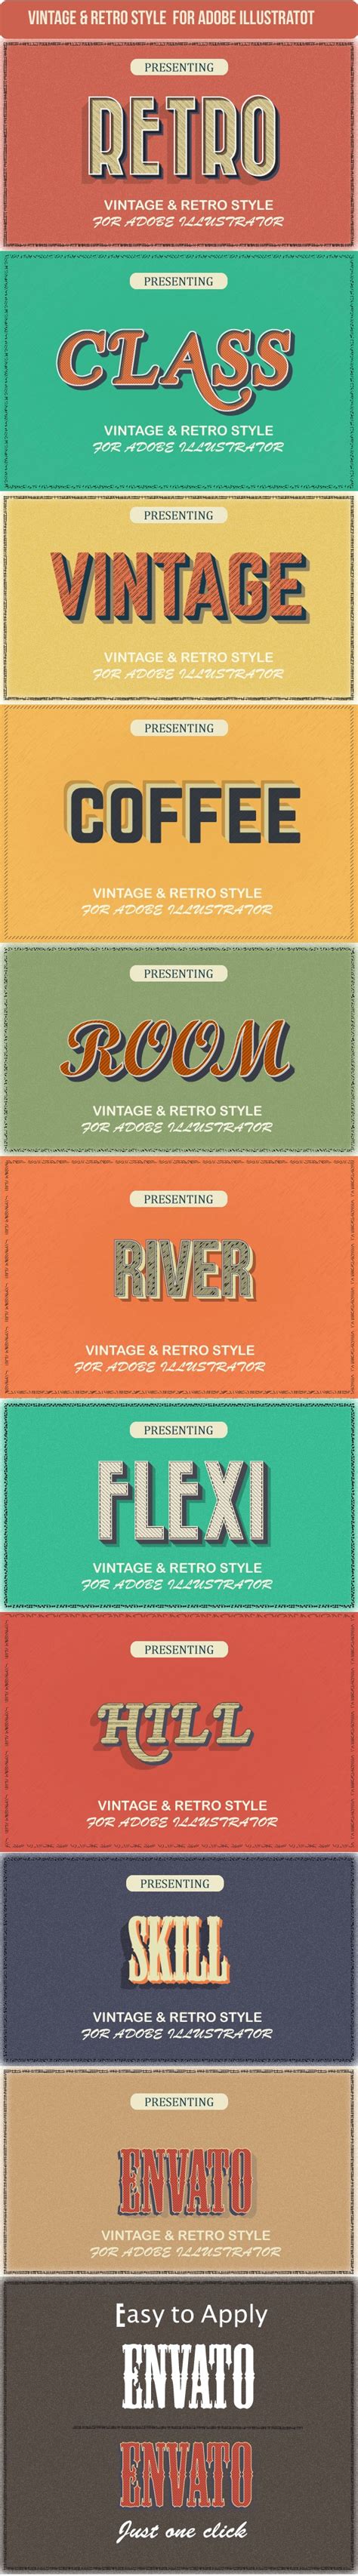 Vintage Graphic Styles For Illustrator By Ahmedrubel Graphicriver